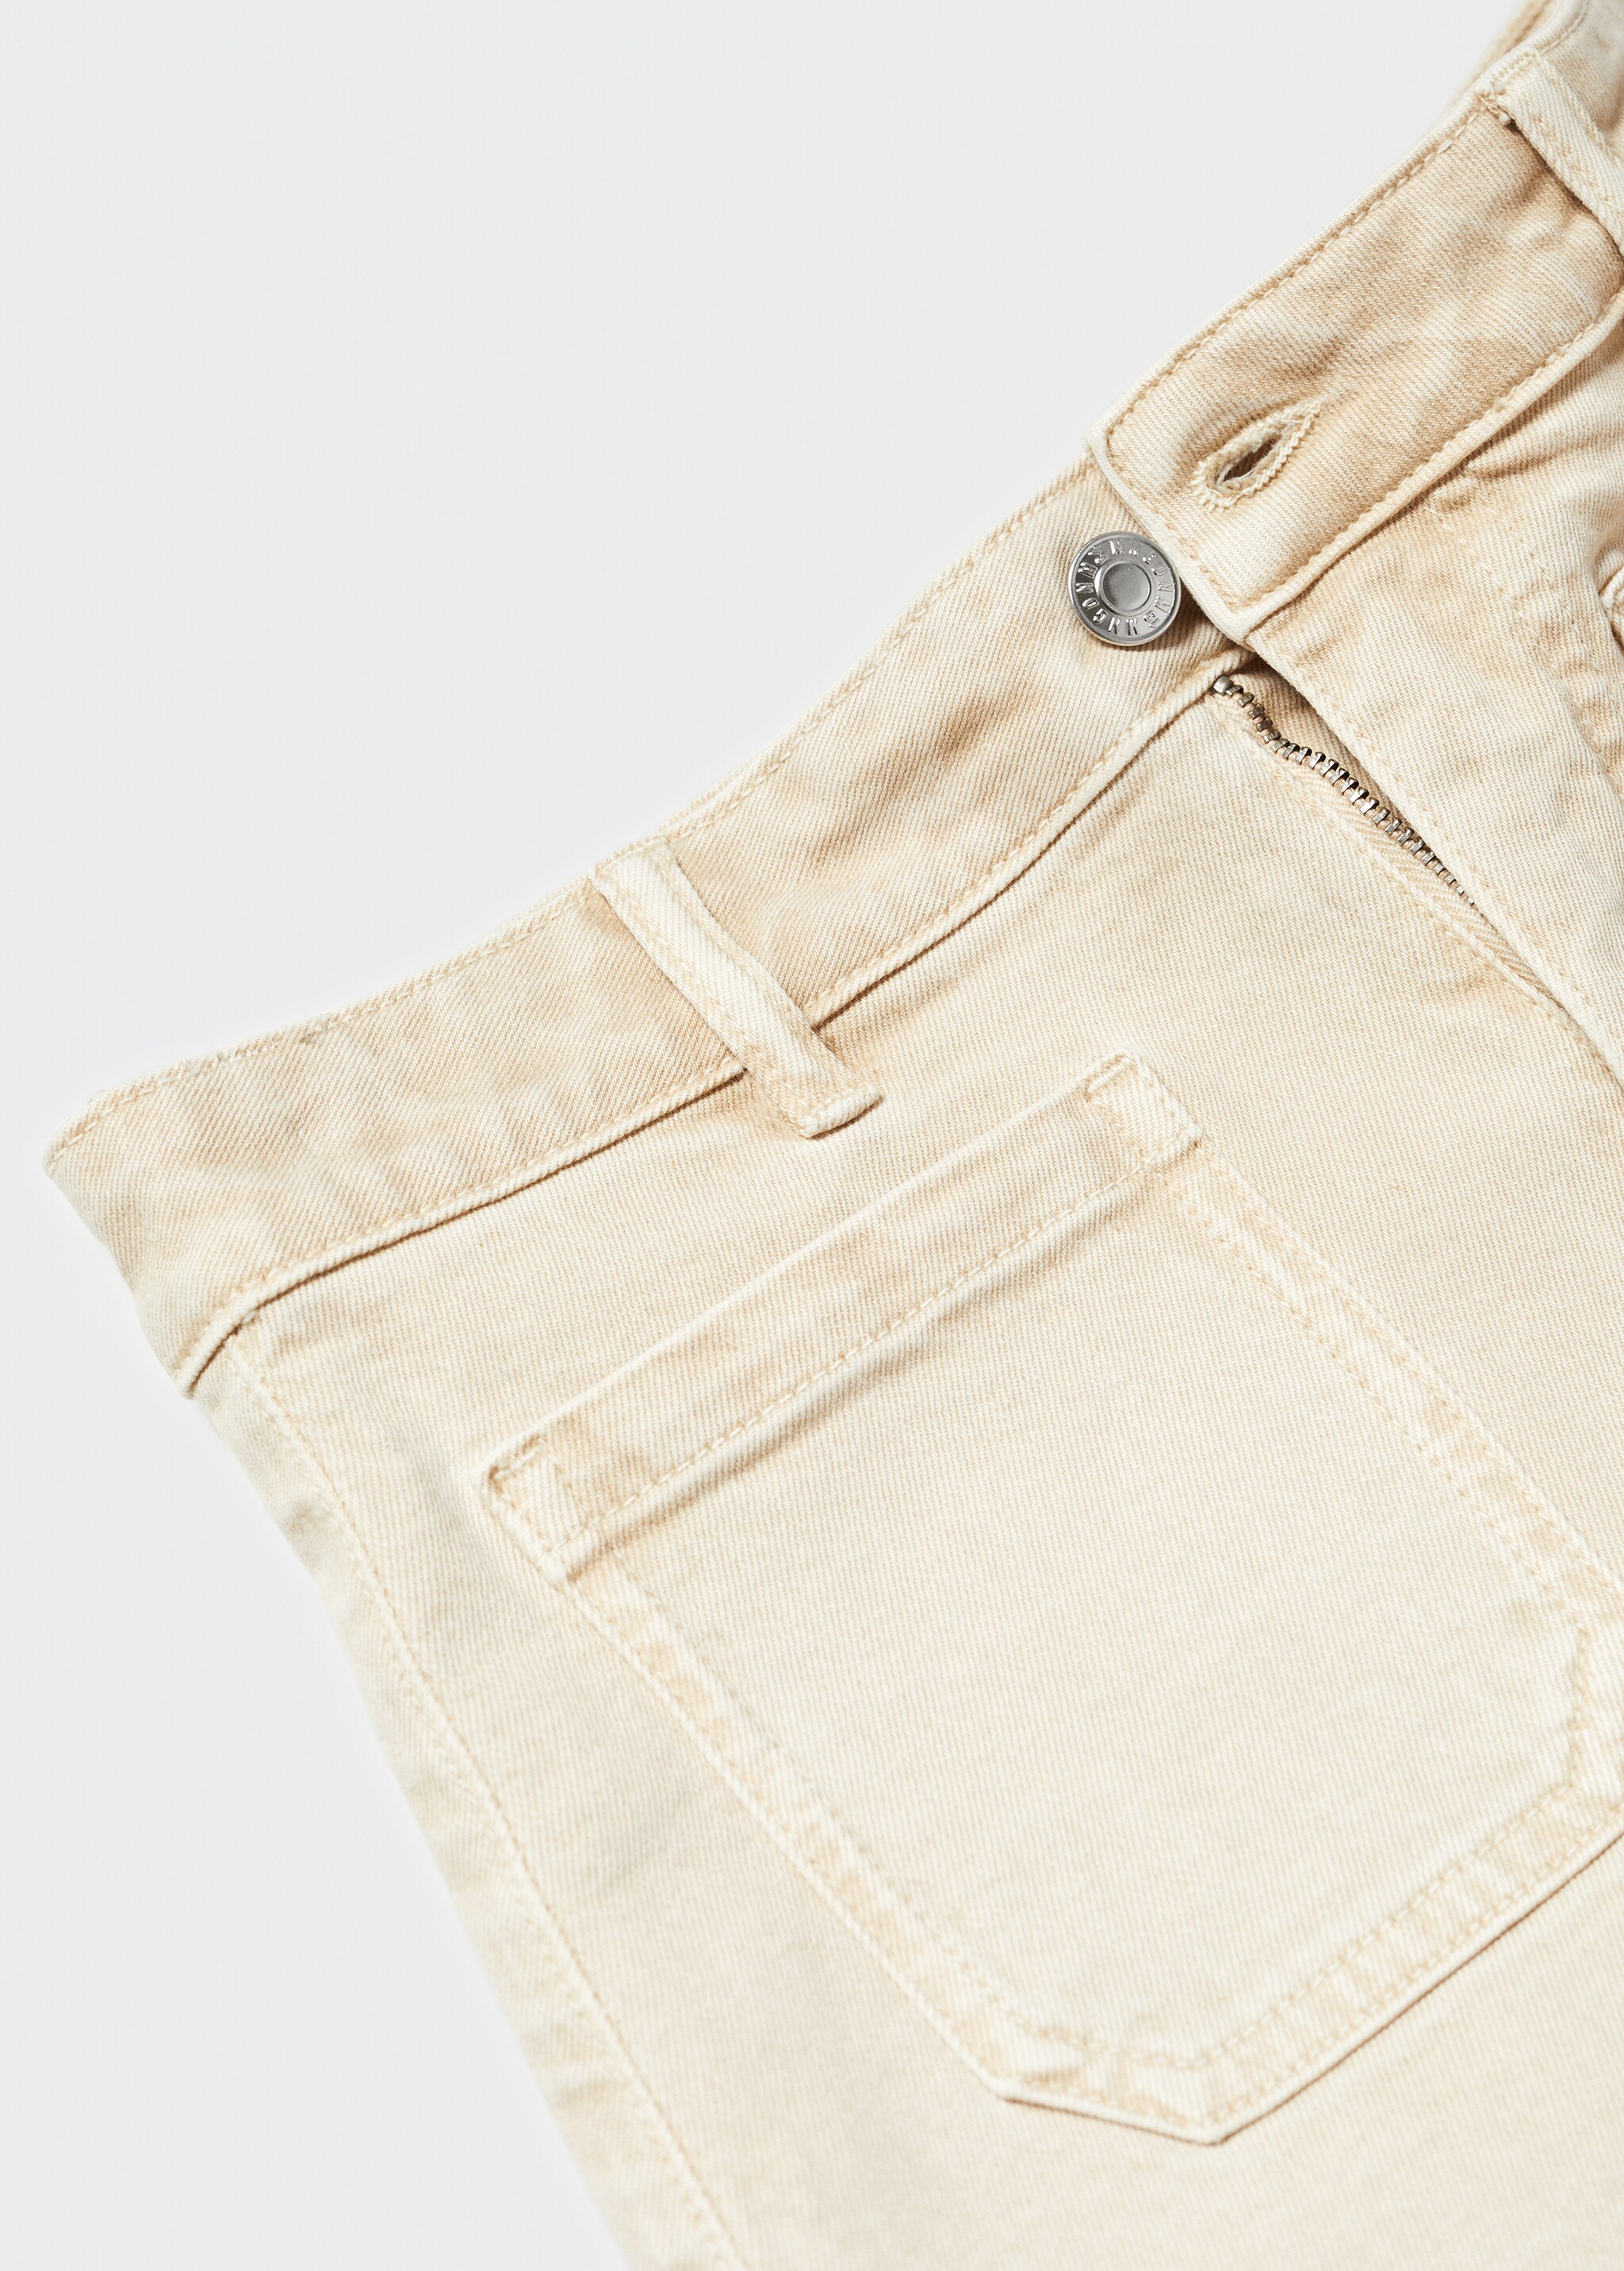 Denim shorts with pockets - Details of the article 8